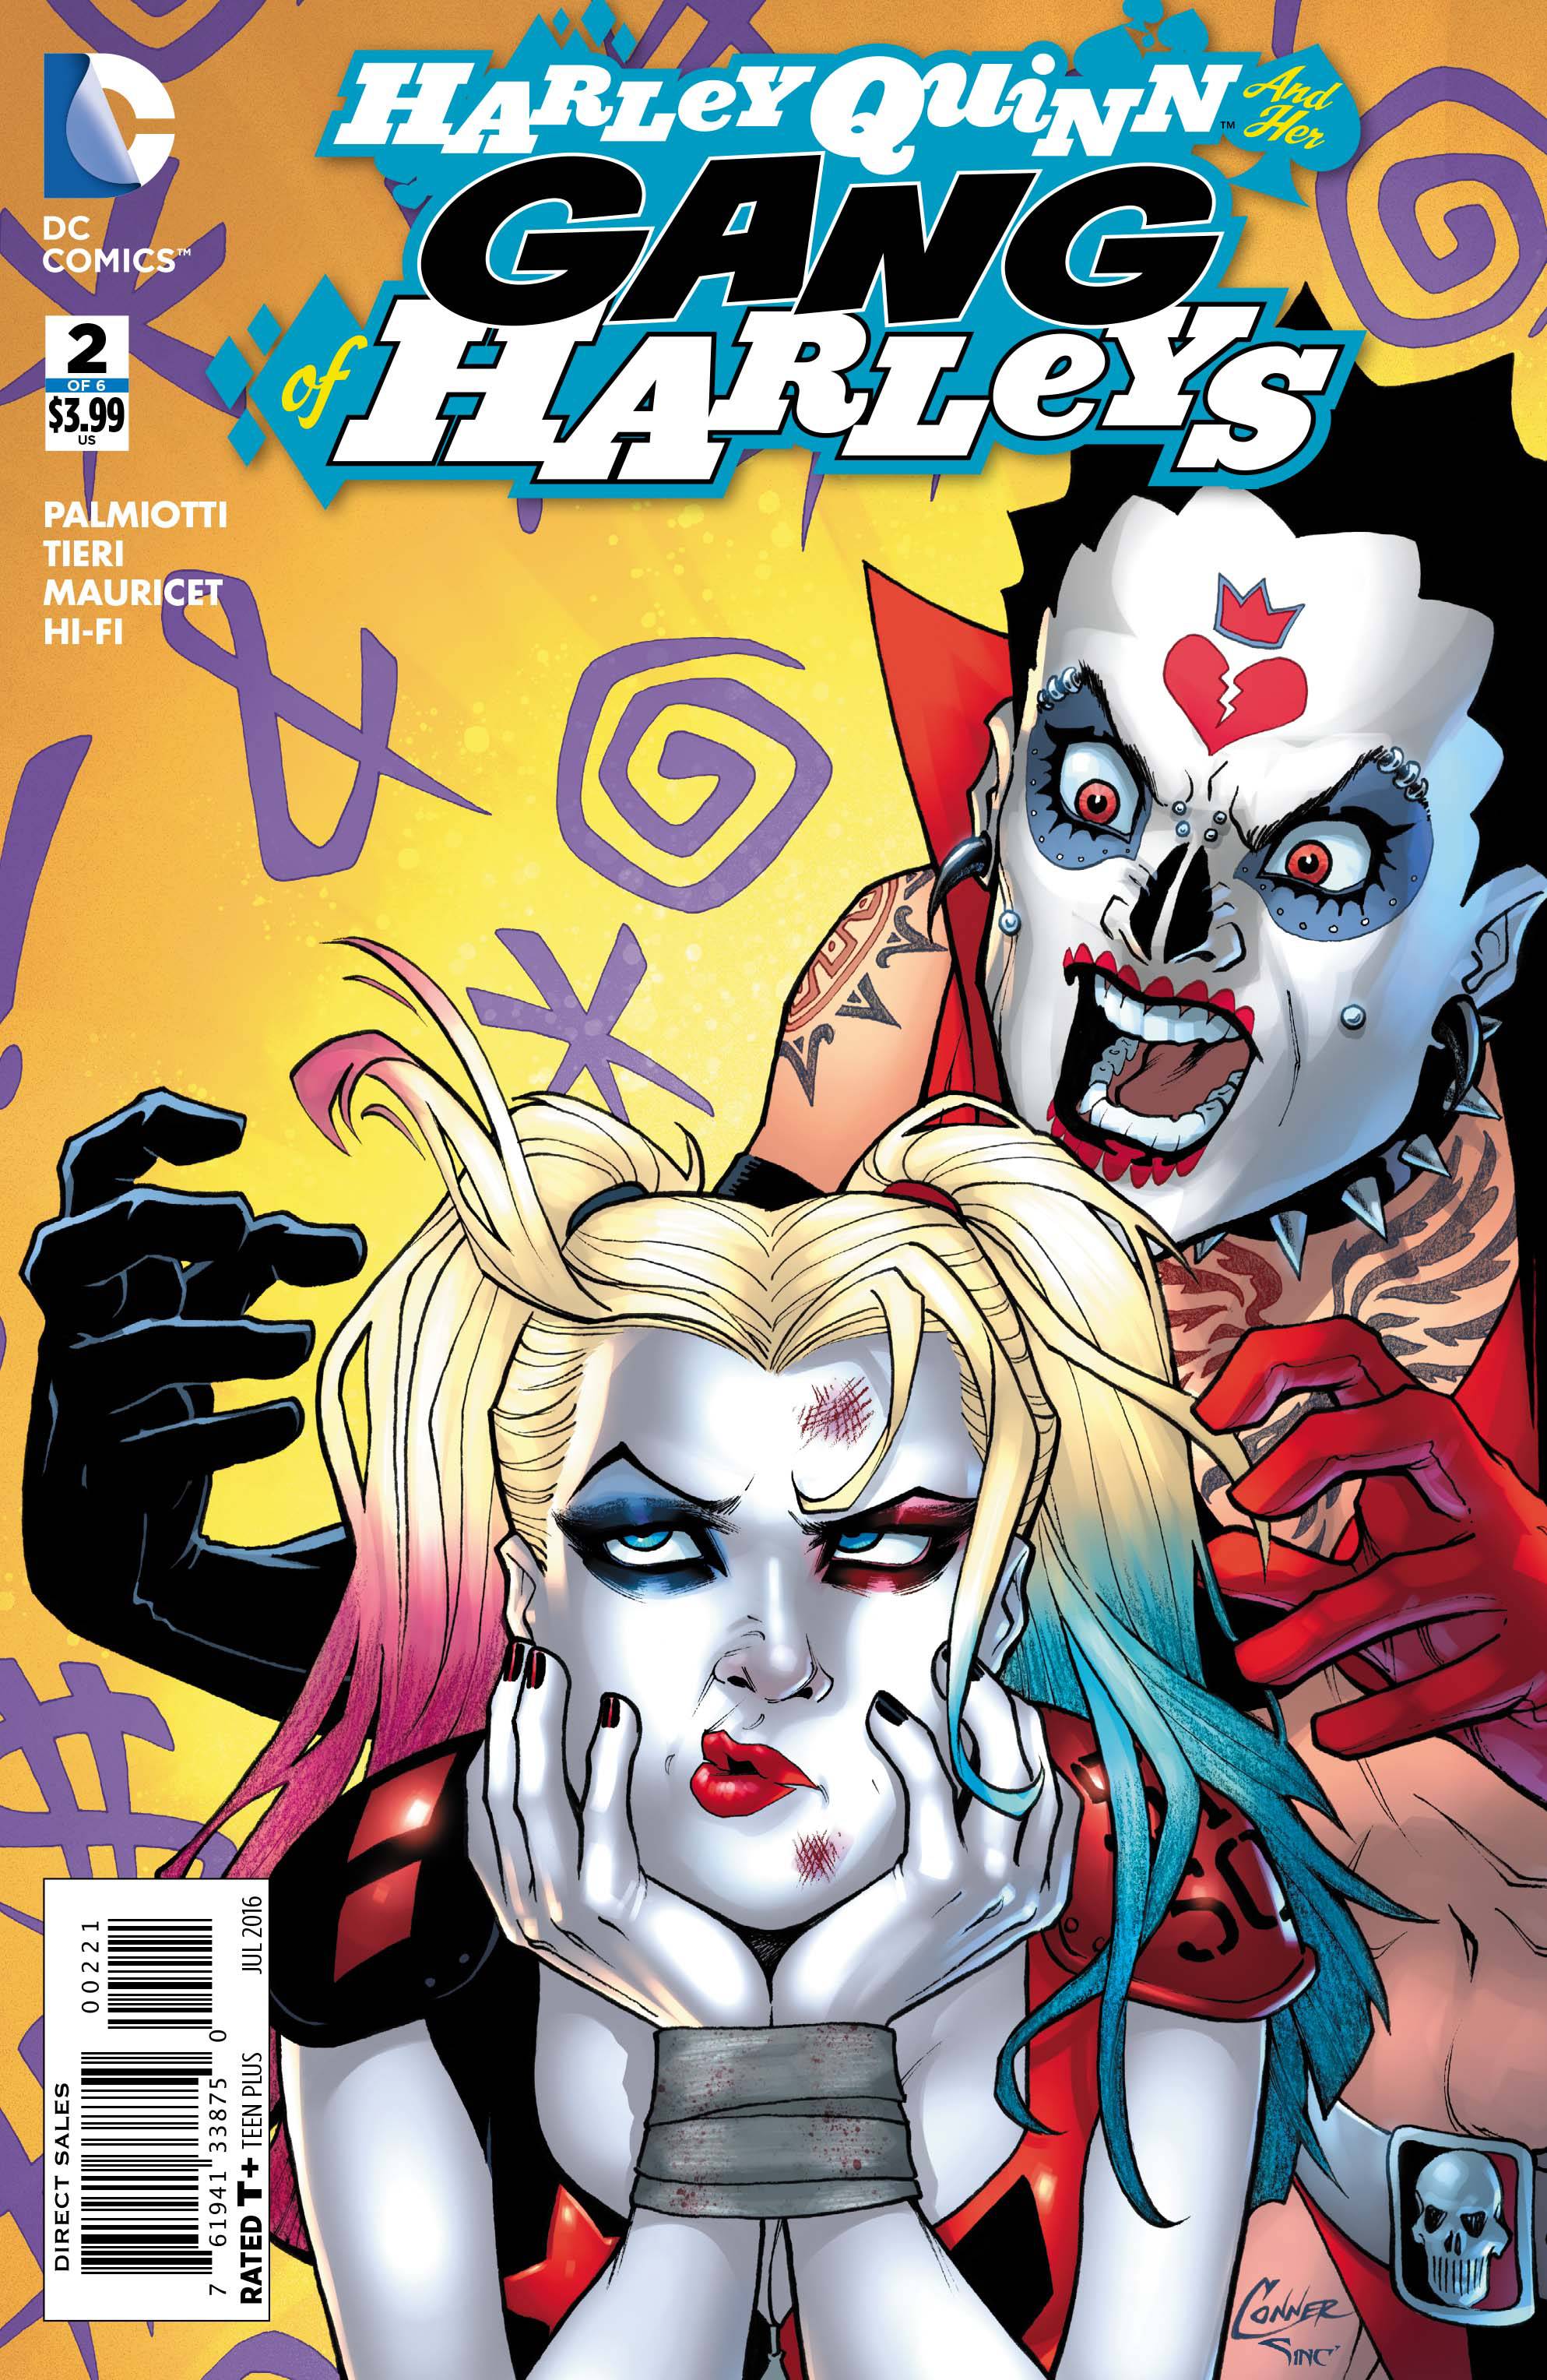 Harley Quinn And Her Gang of Harleys #2 Variant Edition